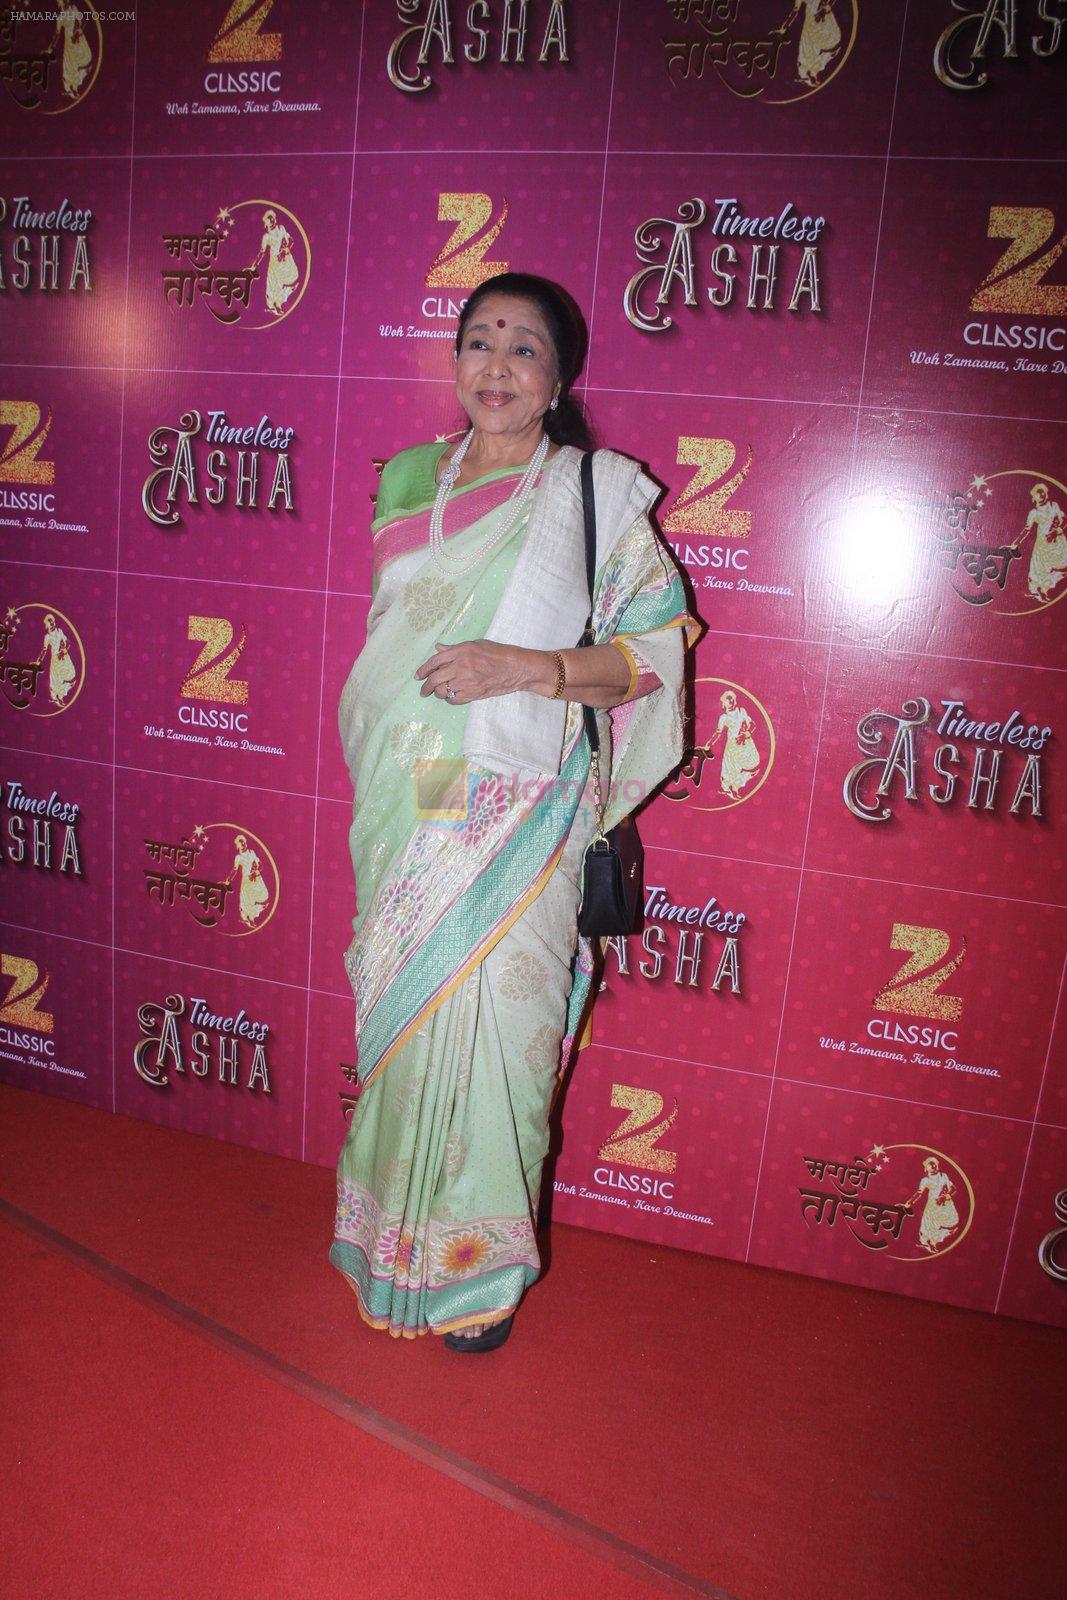 Bollywood singer Asha Bhosle during the musical concert Timless Asha organised by Zee Classsic on occasion of her 83rd birthday in Mumbai, India on September 8, 2016